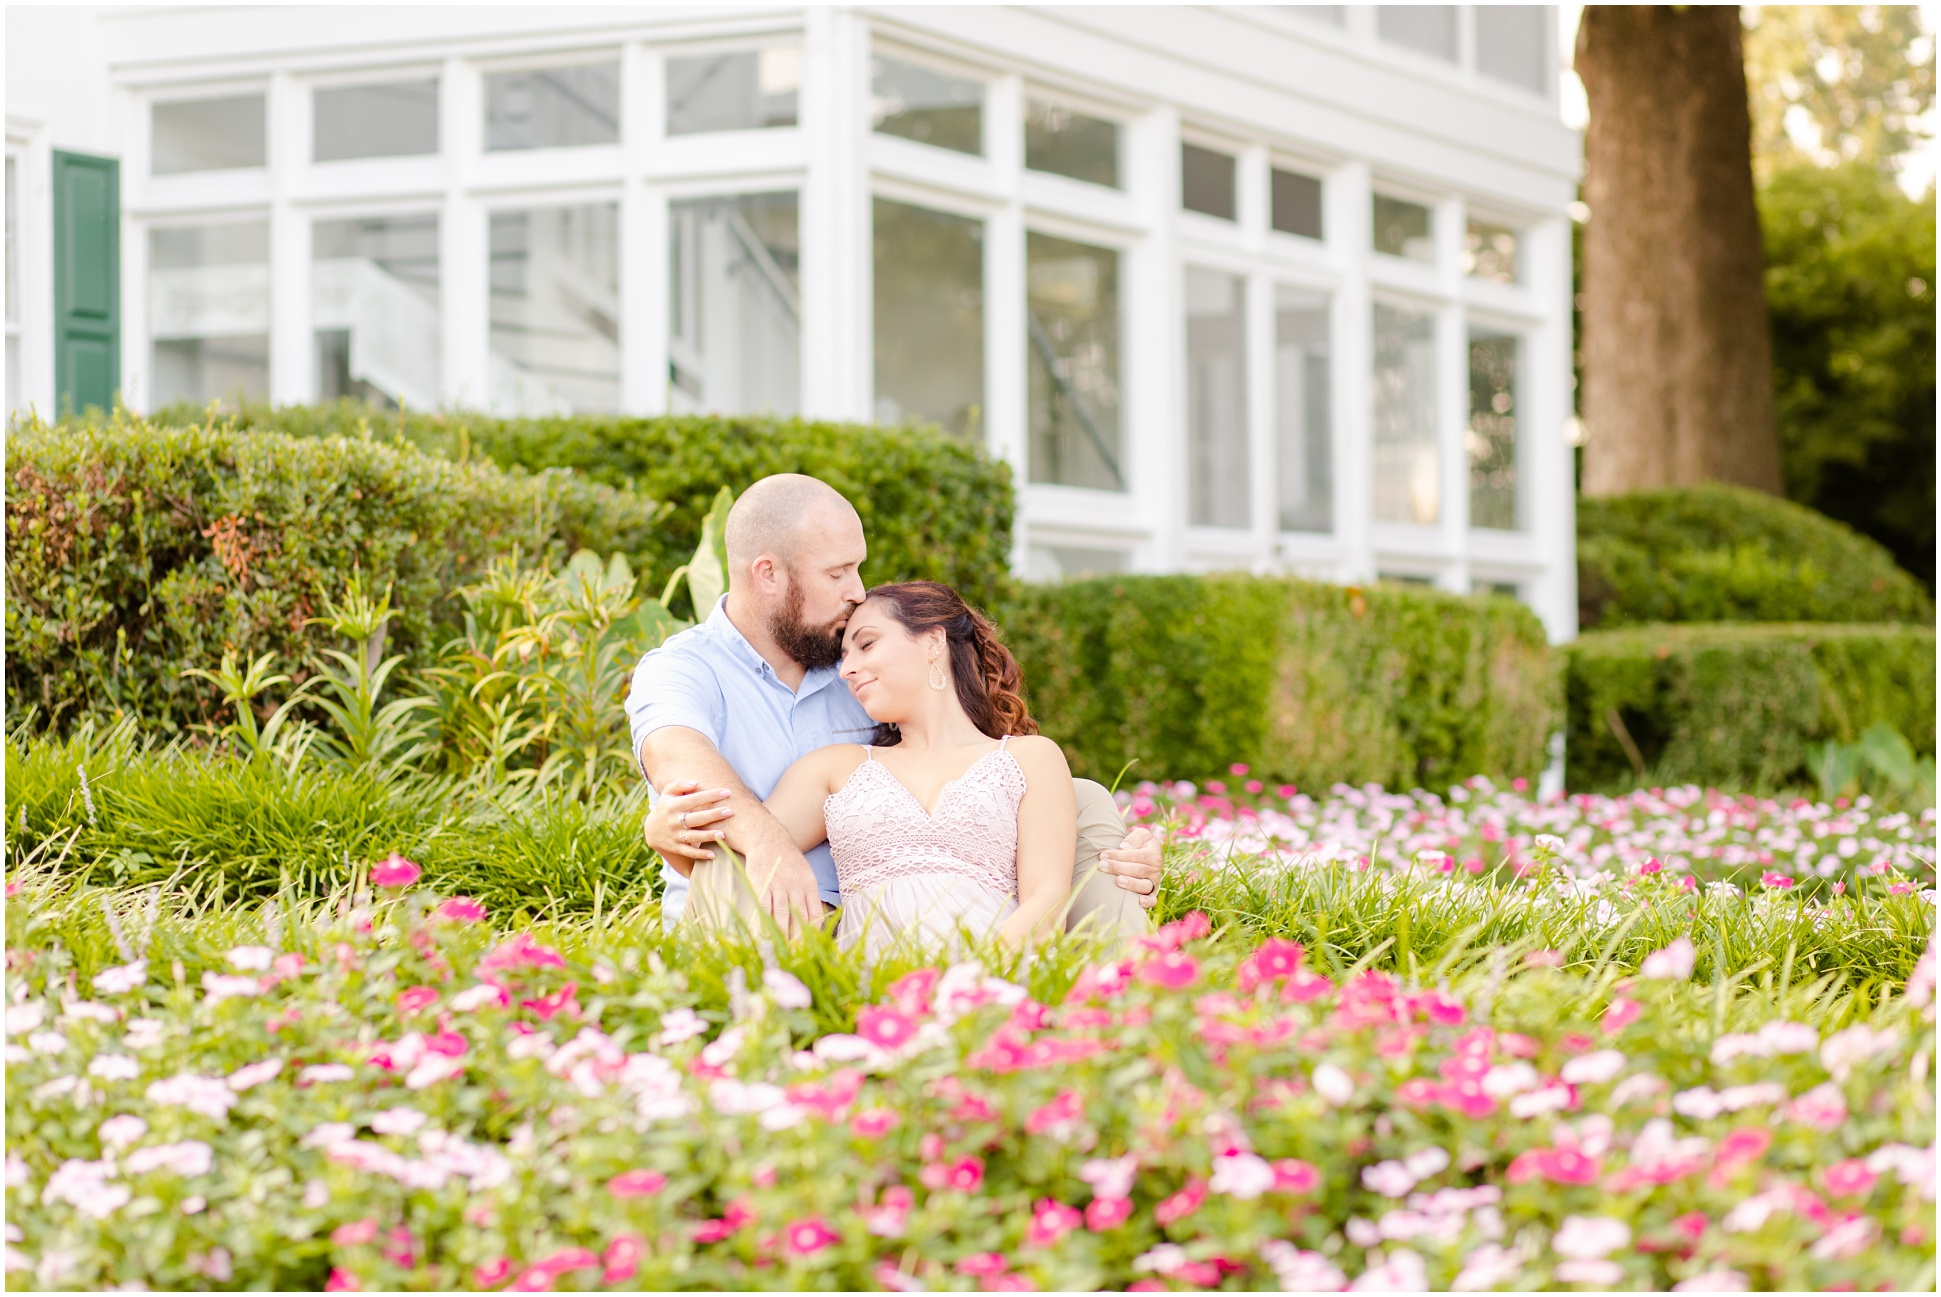 Bride and groom snuggling in the garden of dark and light pink flowers